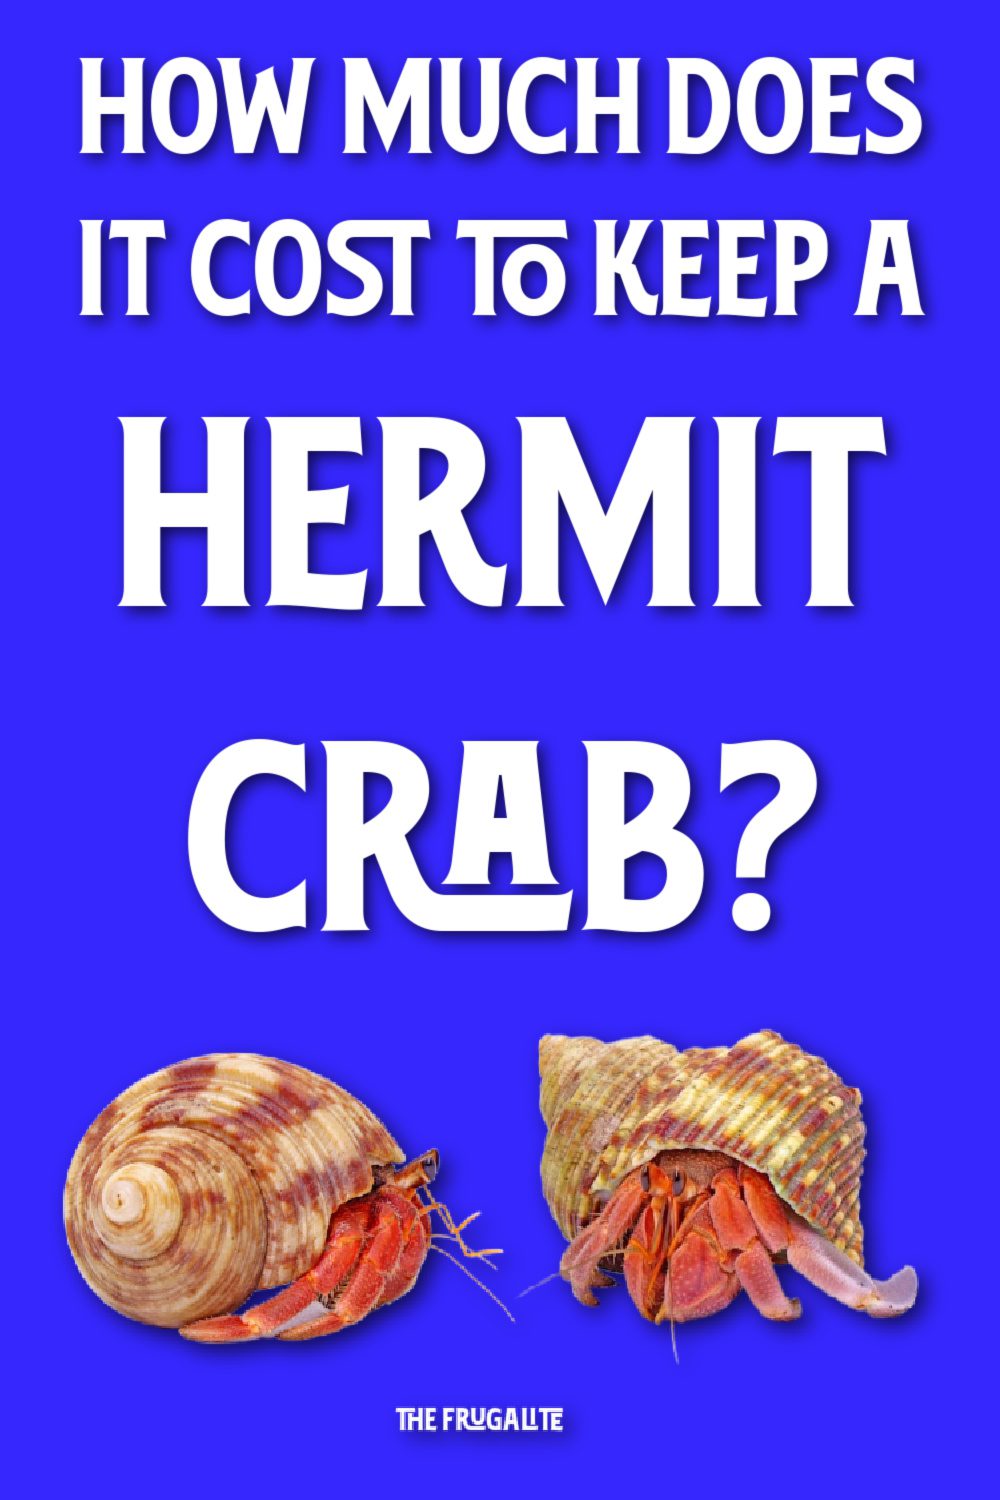 How Much Does It Cost to Keep a Hermit Crab?